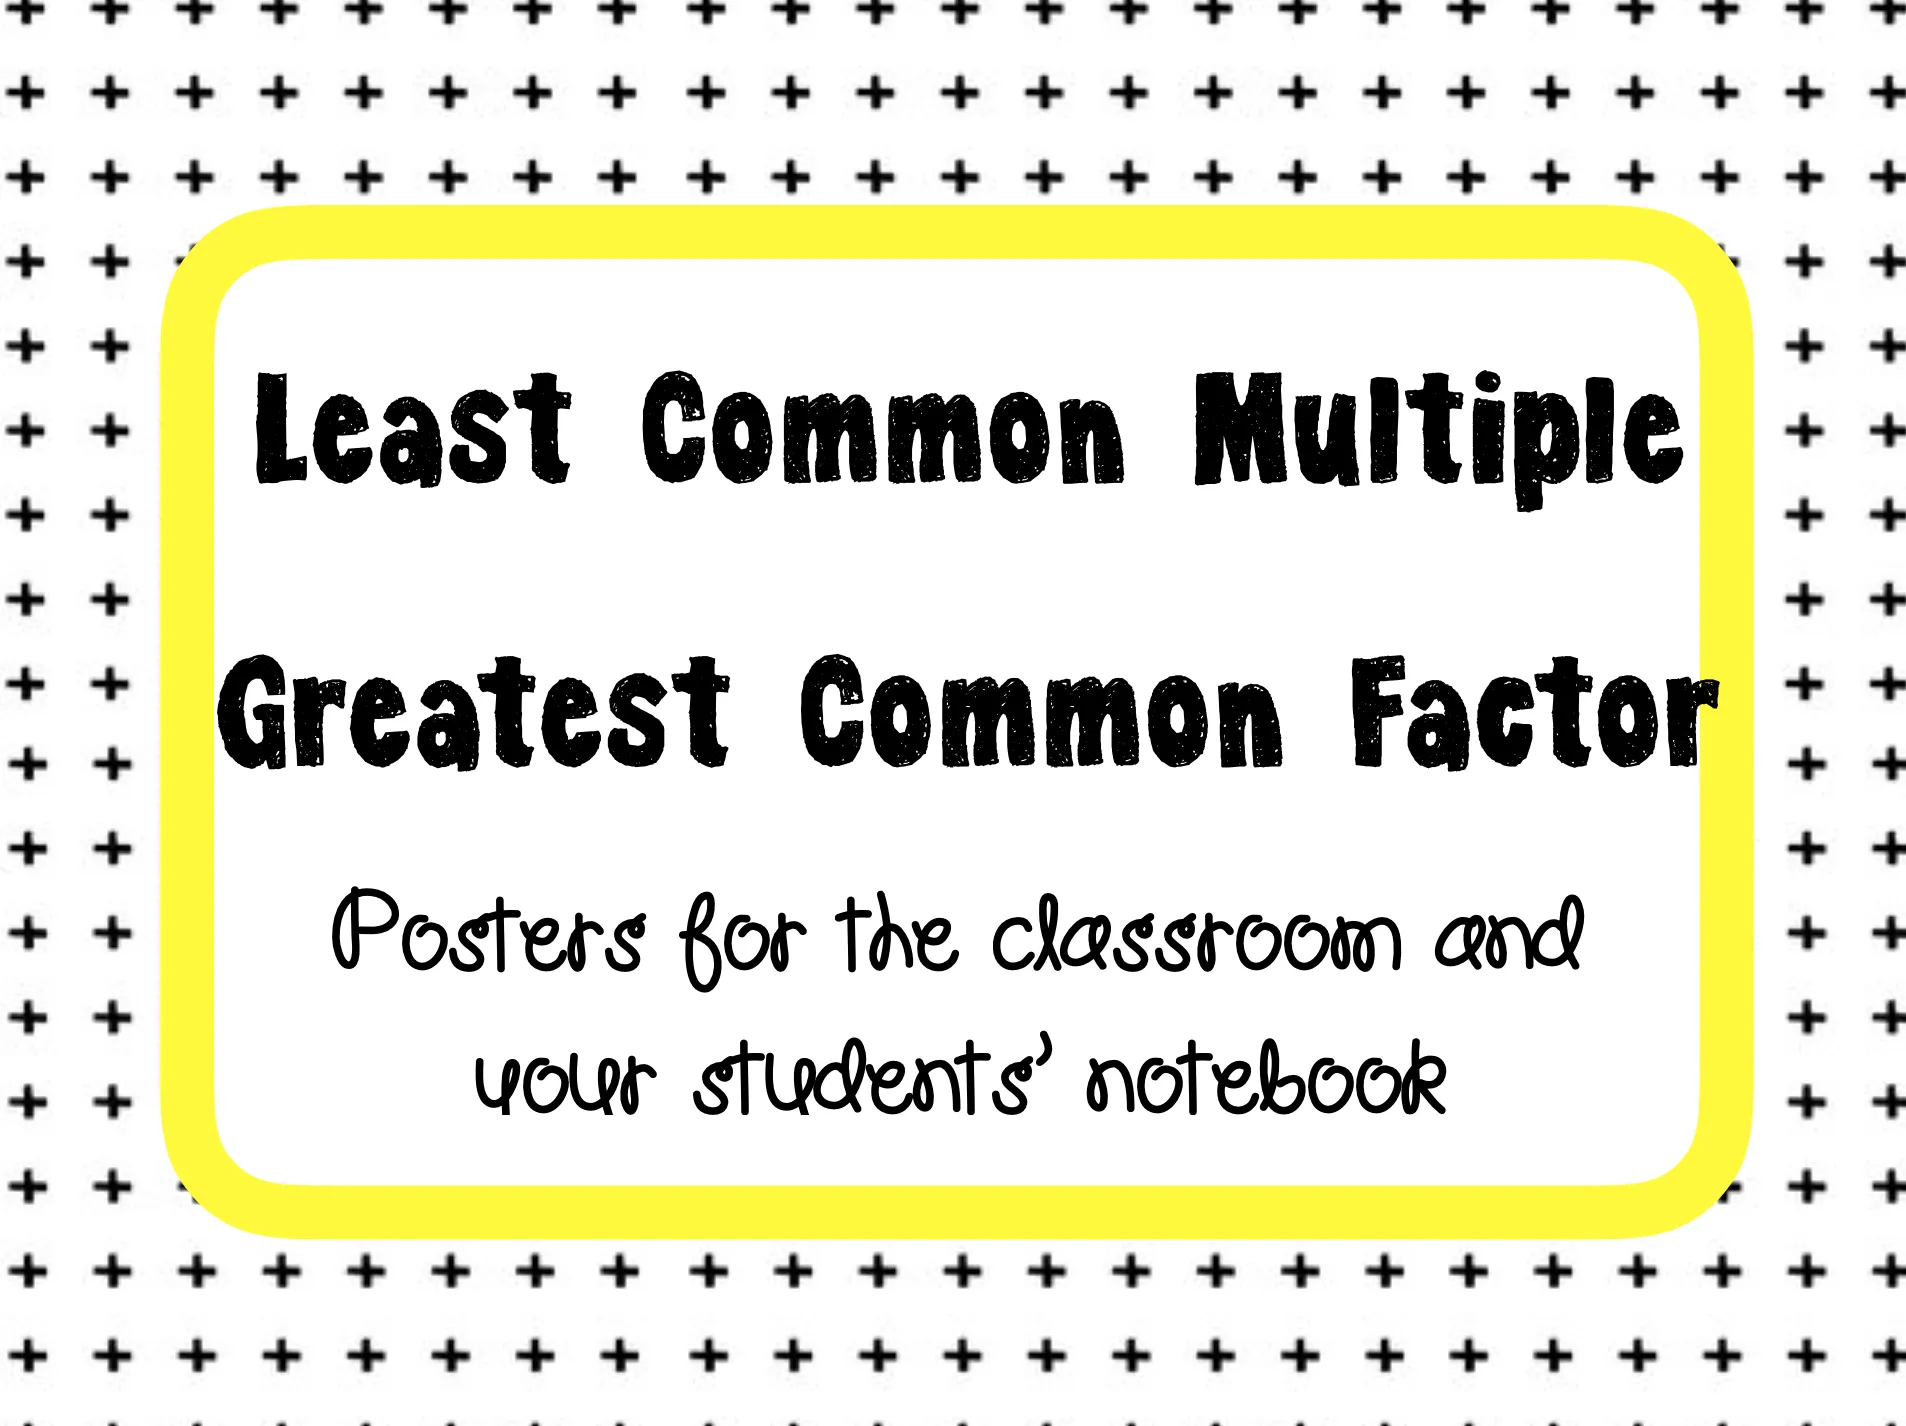 Least Common Multiple and Greatest Common Factor Posters